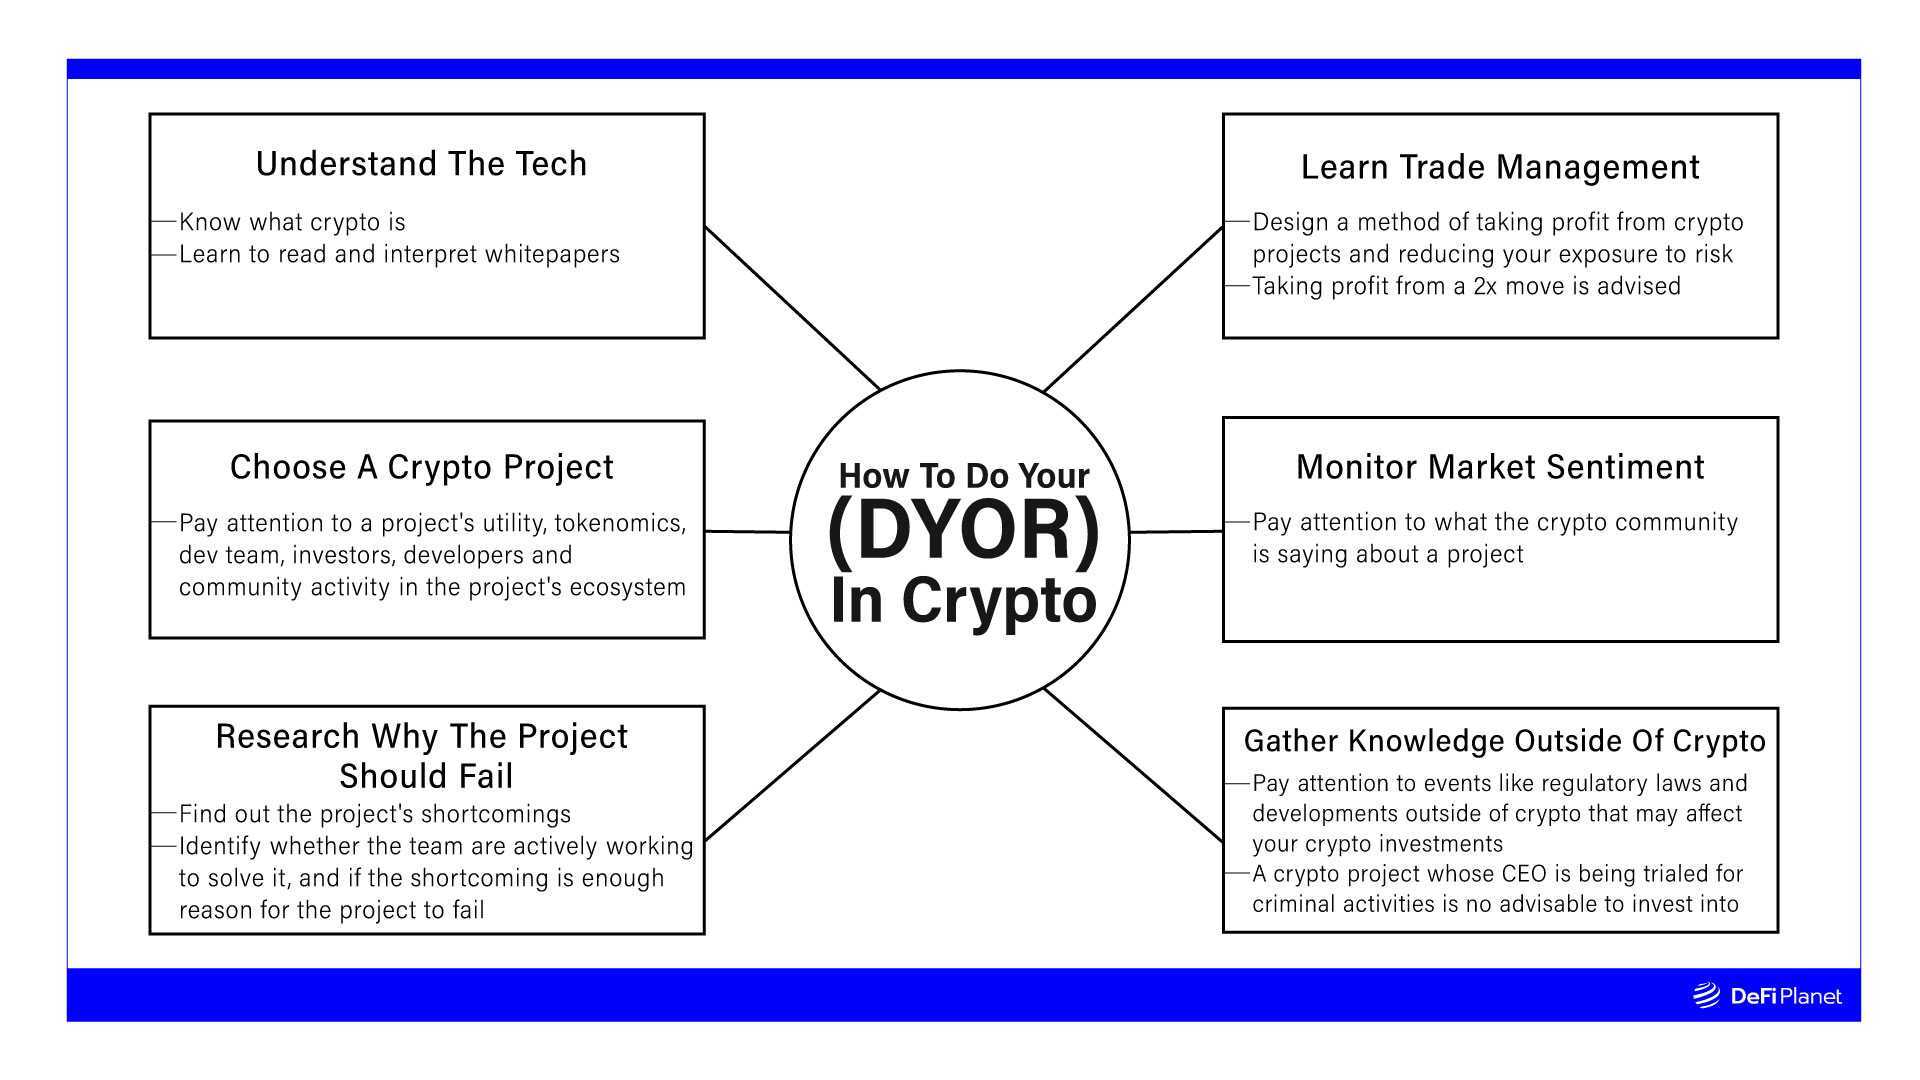 Chart showing How To Do Your (DYOR) In Crypto on DeFi Planet